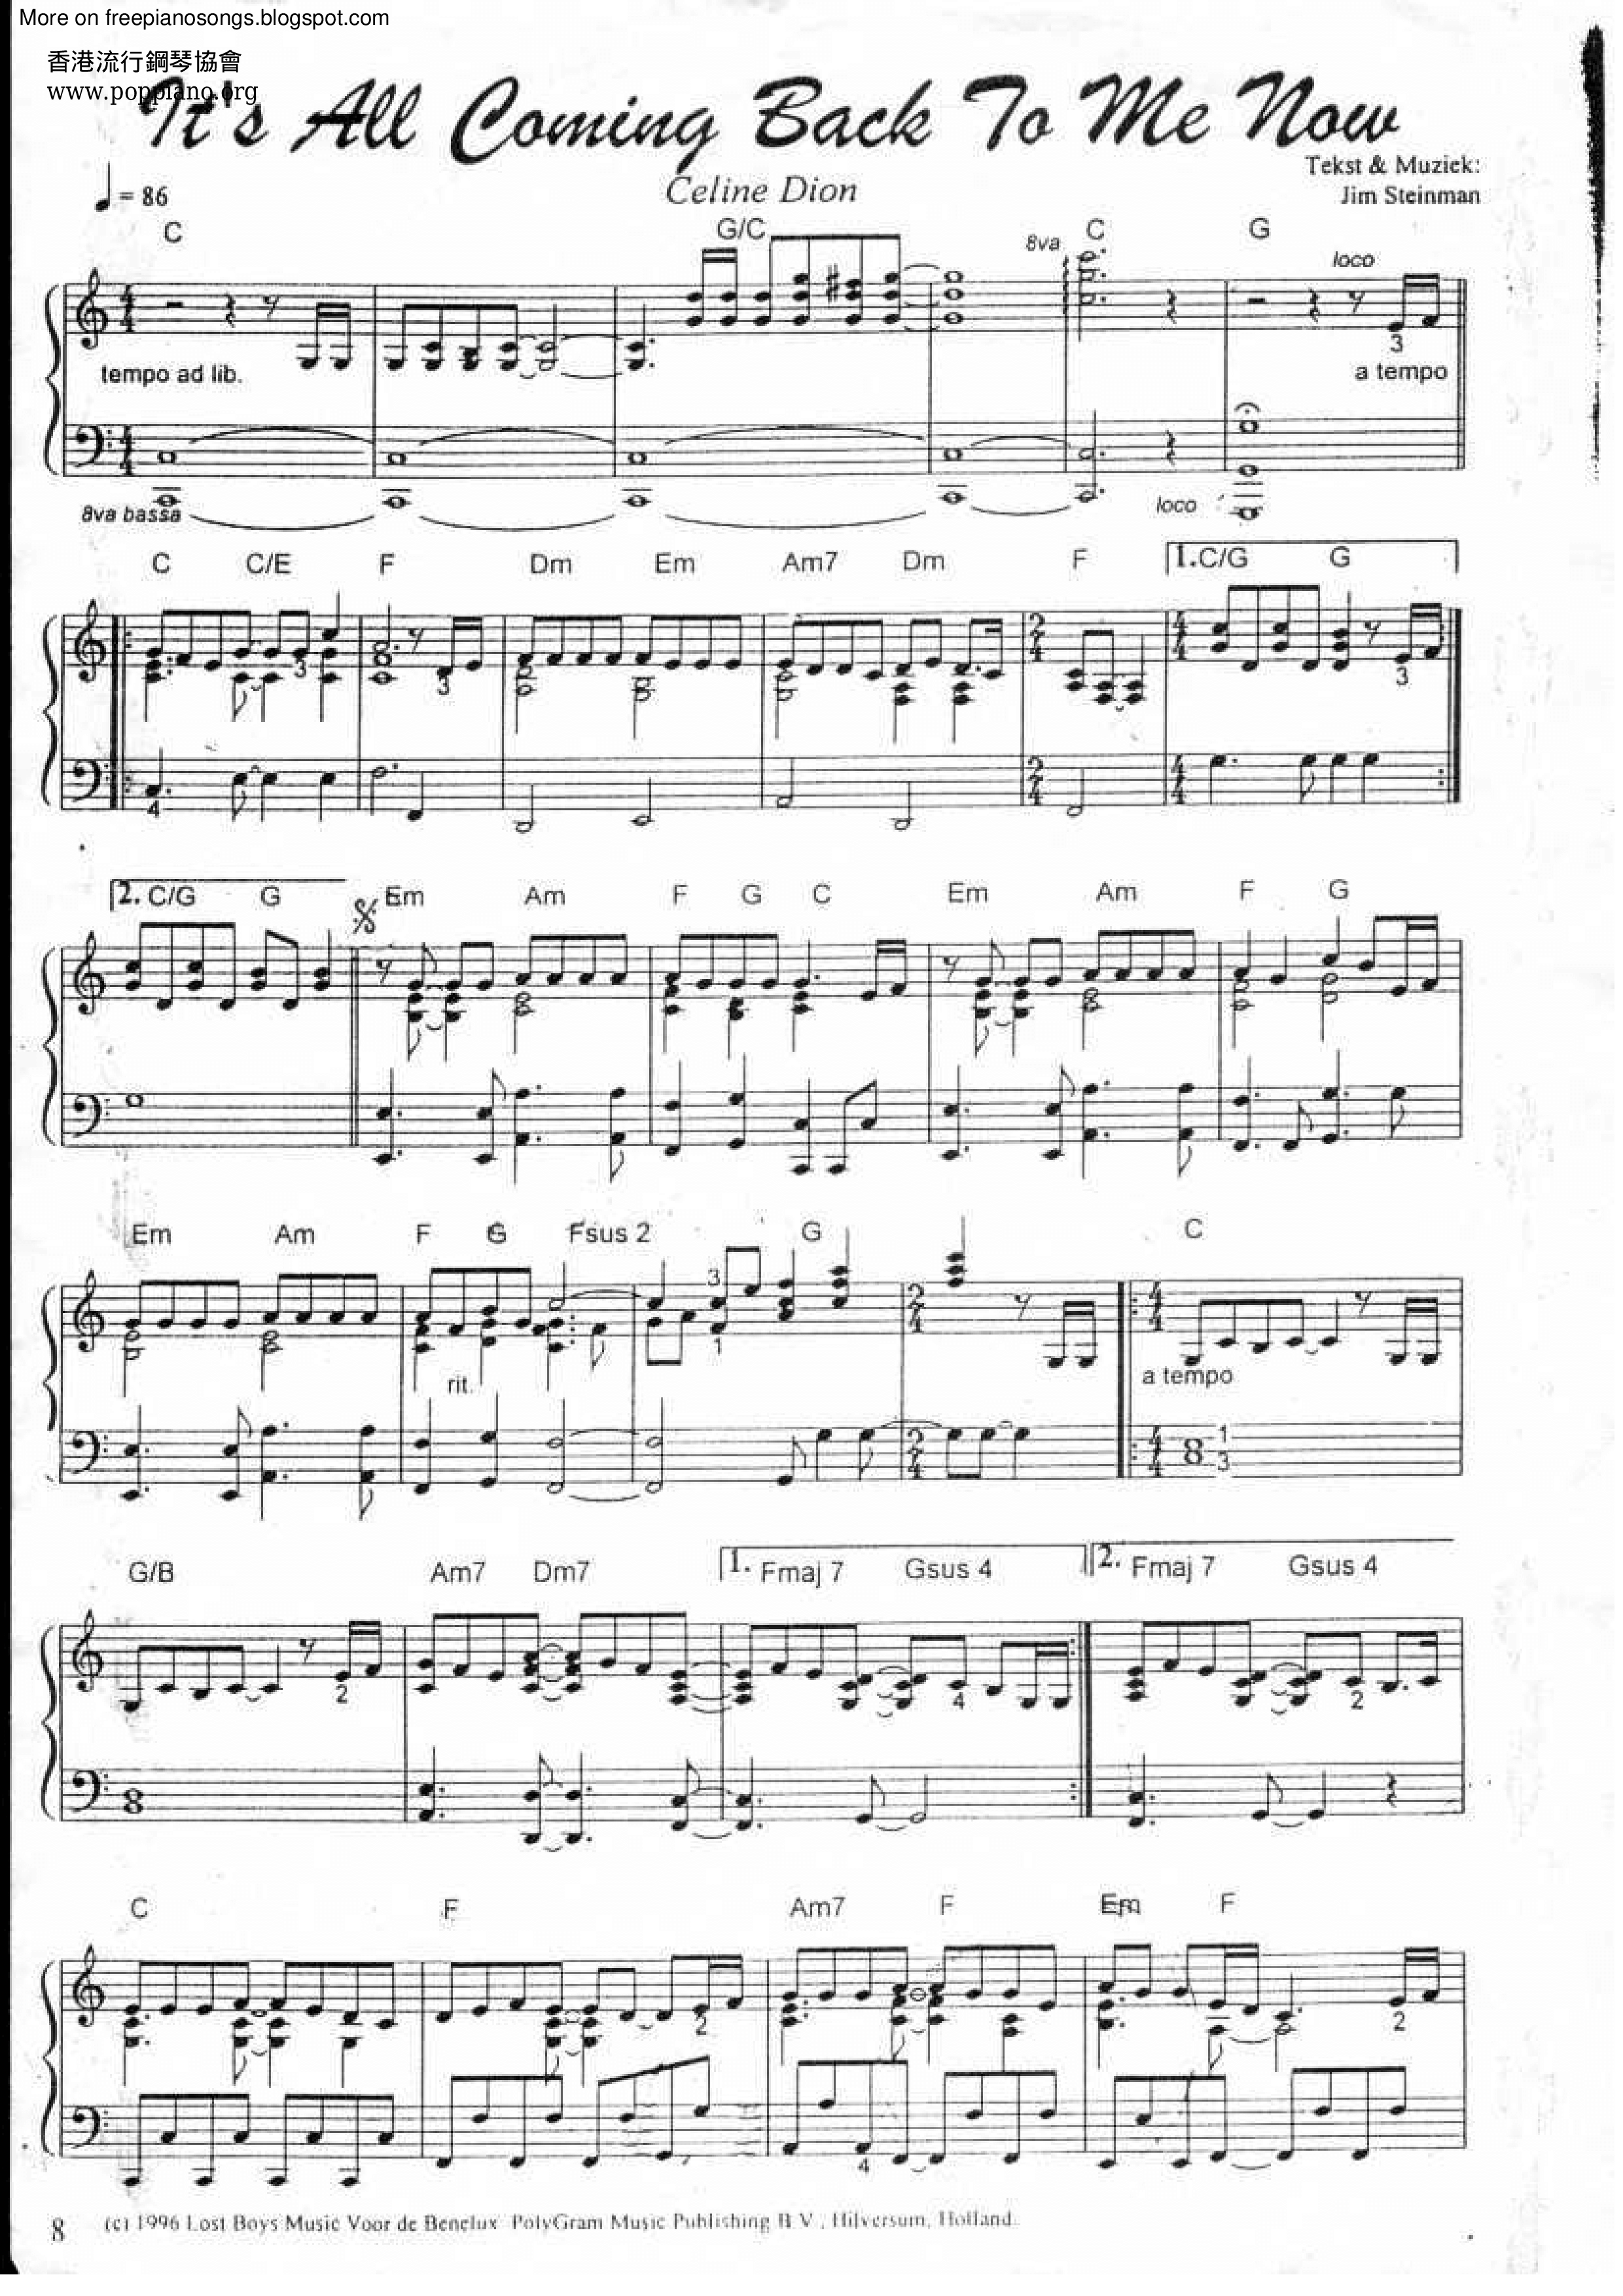 Celine Dion-It s All Coming Back To Me Now Sheet Music pdf